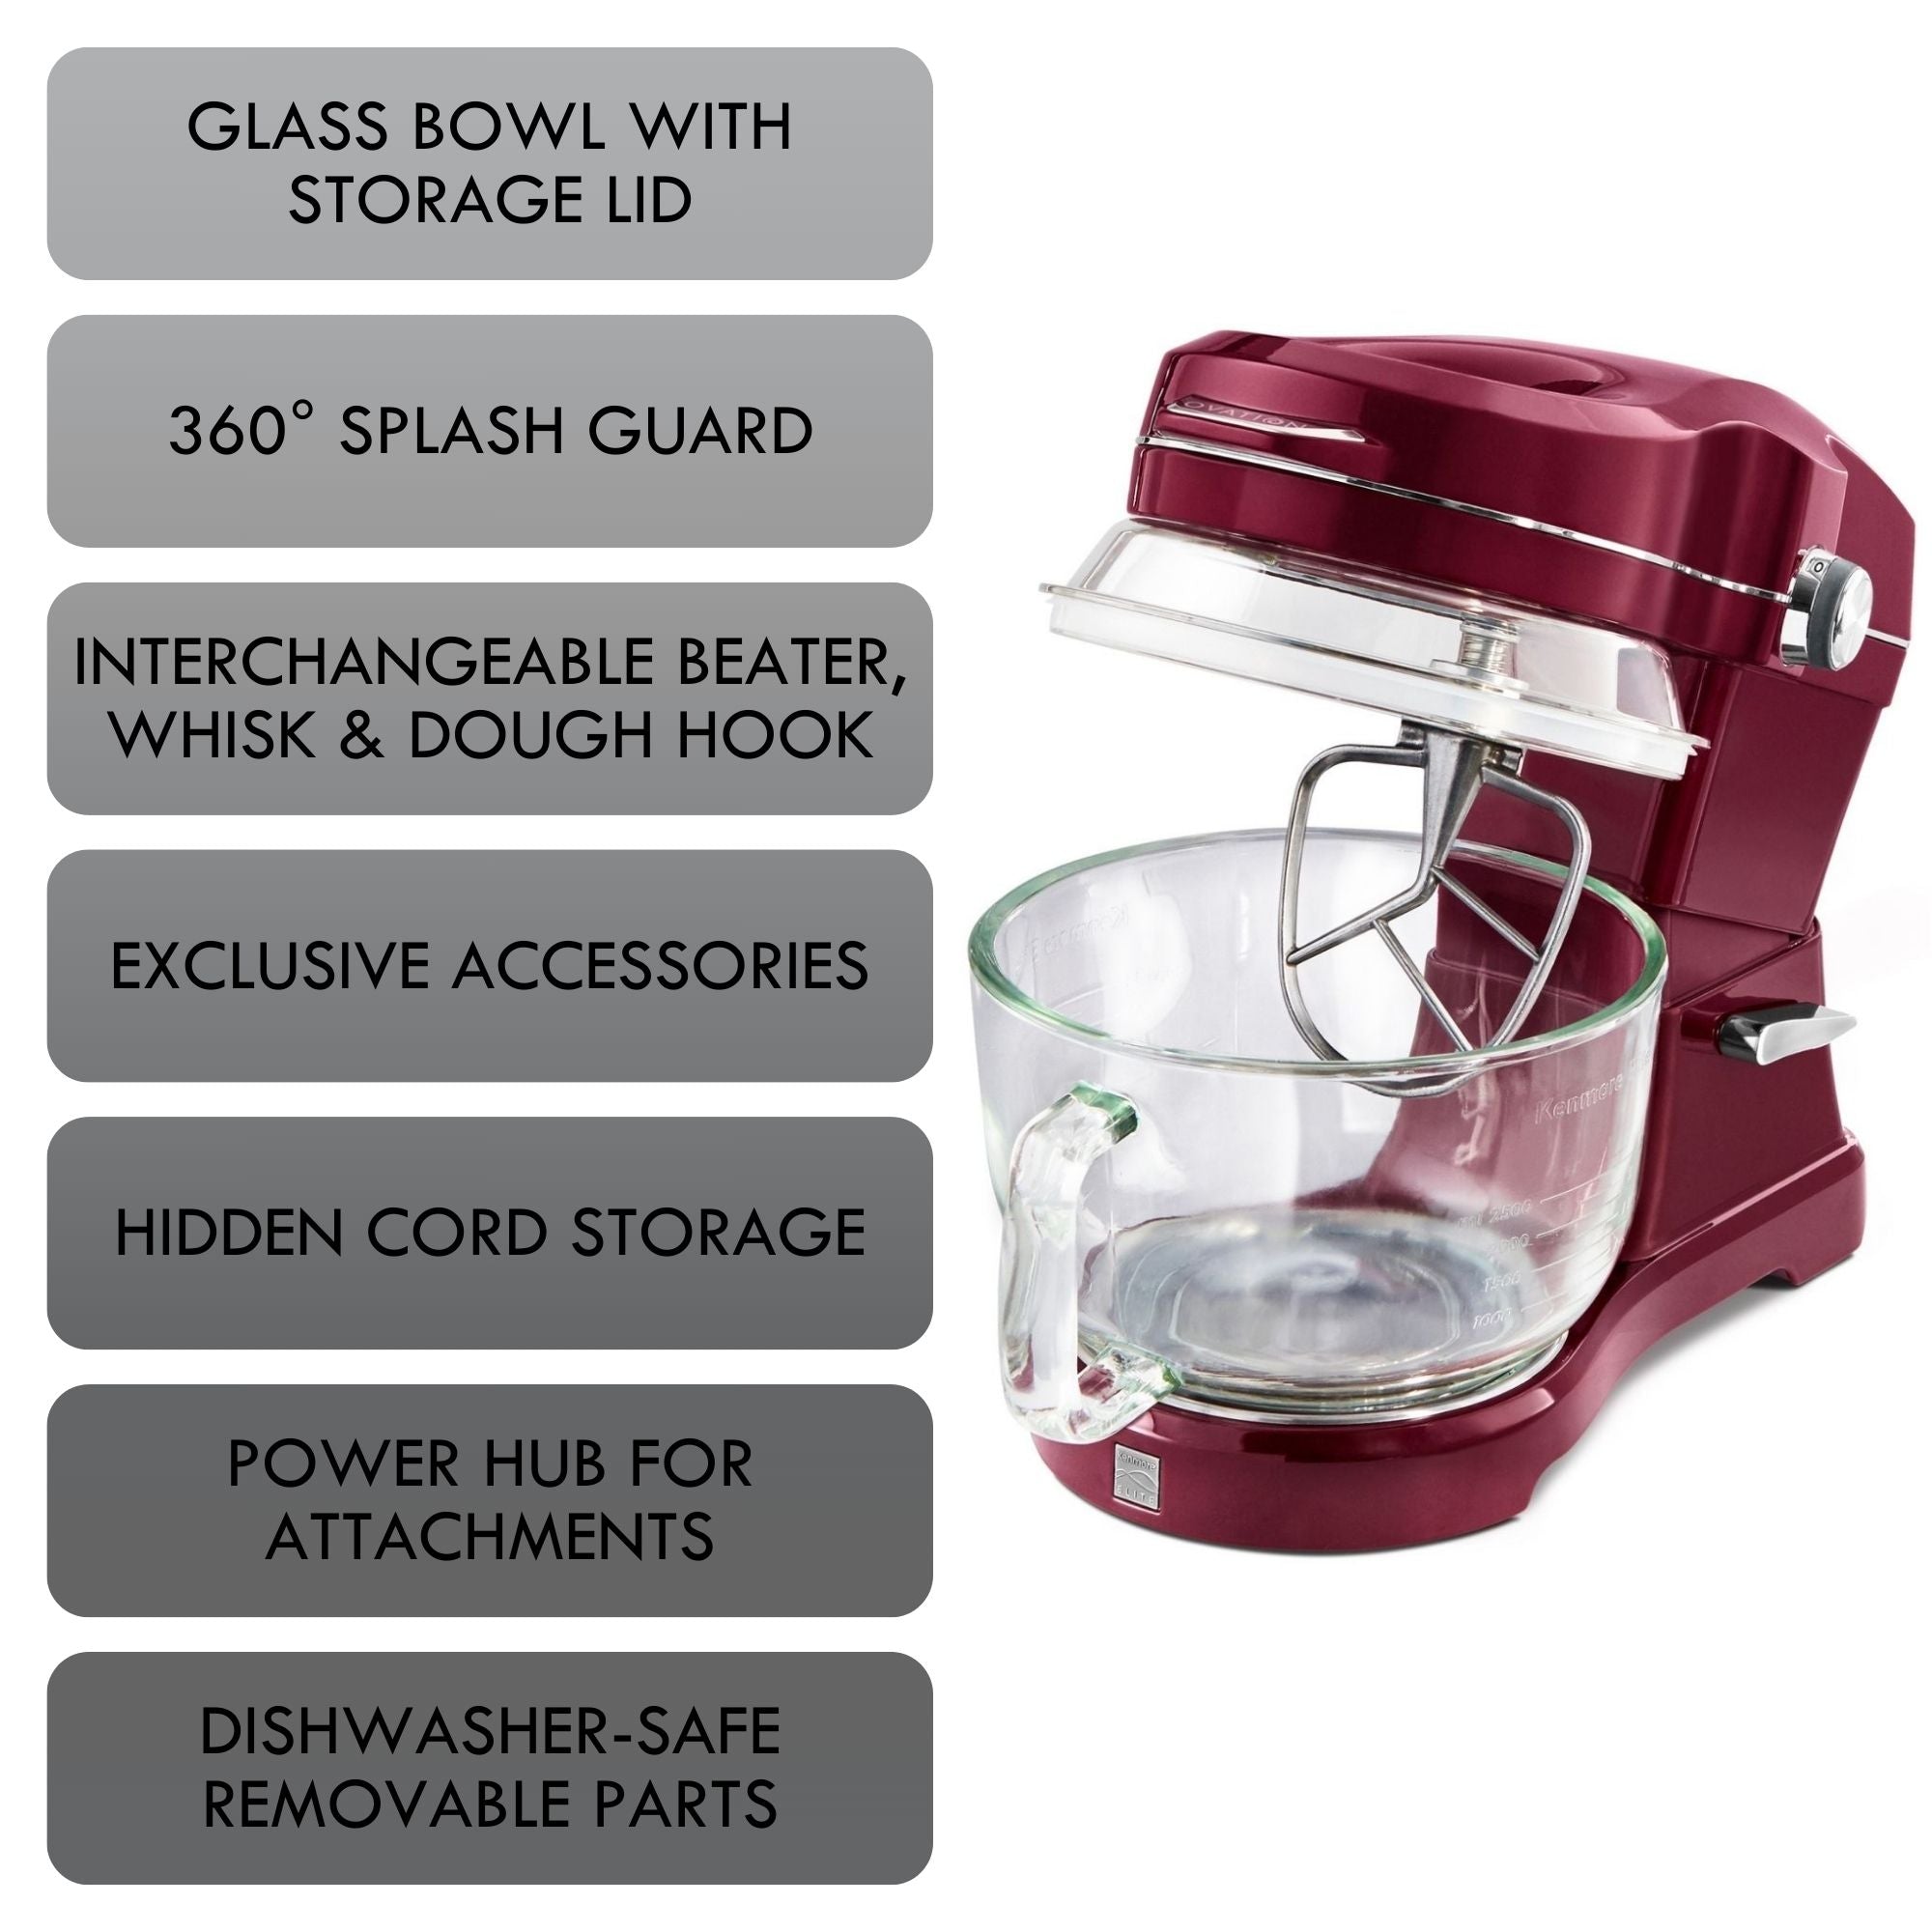 Kenmore Elite Ovation mixer with tilt-head raised and features listed to the left: Glass bowl with storage lid; 360° splash guard; interchangeable beater, whisk and dough hook; exclusive accessories; hidden cord storage; power hub for attachments; dishwasher-safe removable parts